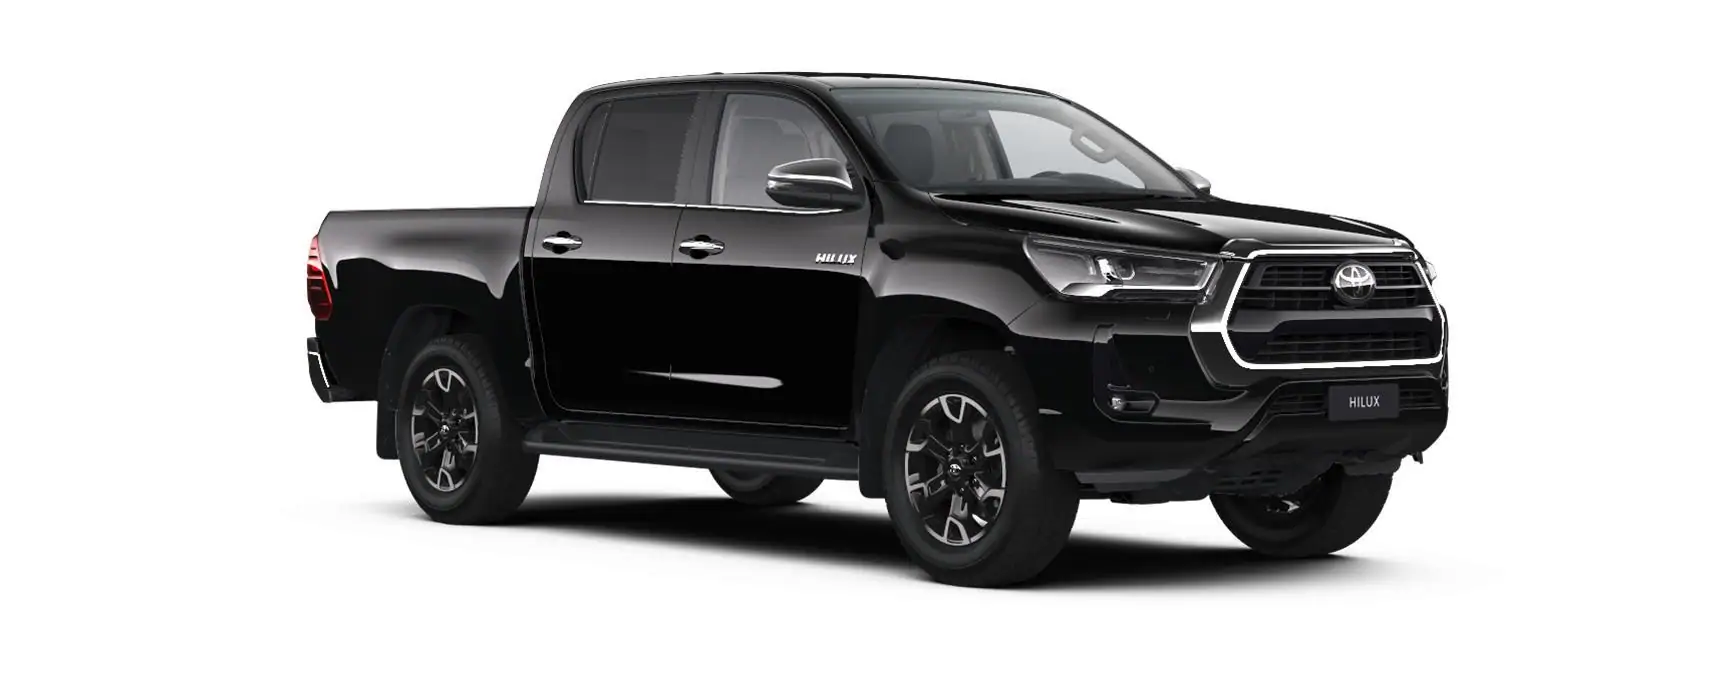 Nieuw Toyota Hilux 4x4 Double Cab 2.8 204hp 6AT Lounge LHD 218 - BLACK MICA 4